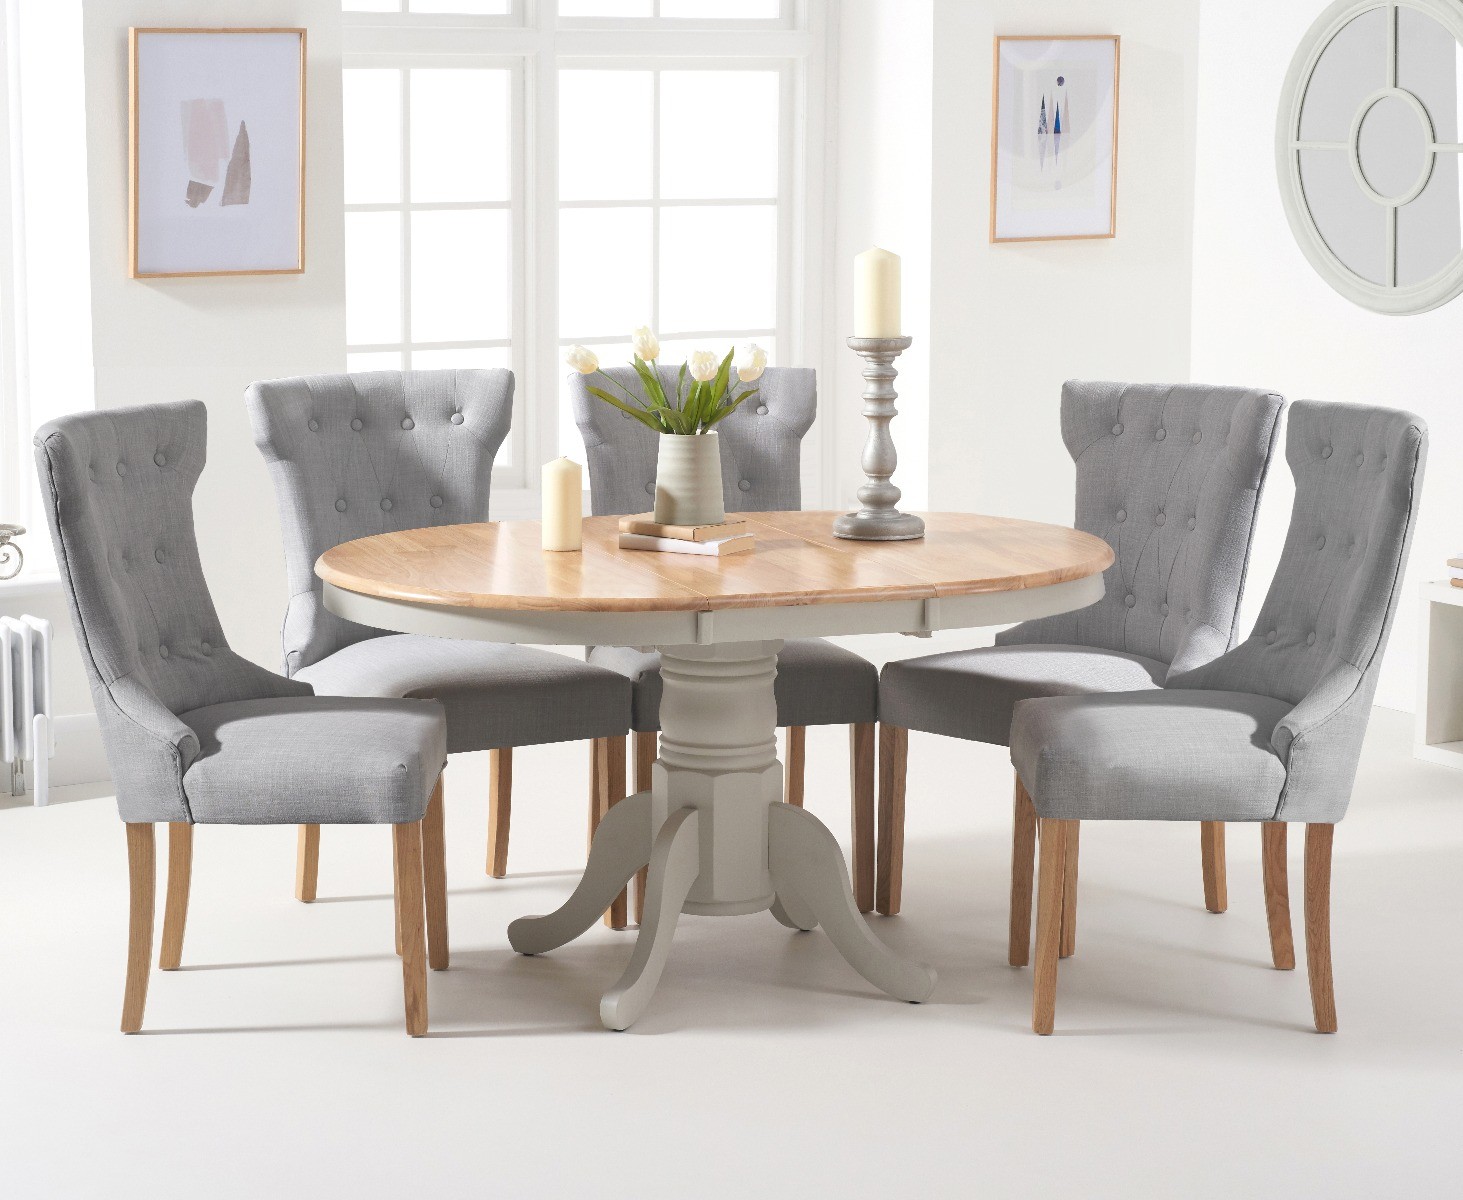 Epsom Oak And Grey Painted Pedestal Extending Table With 6 Grey Clara Chairs